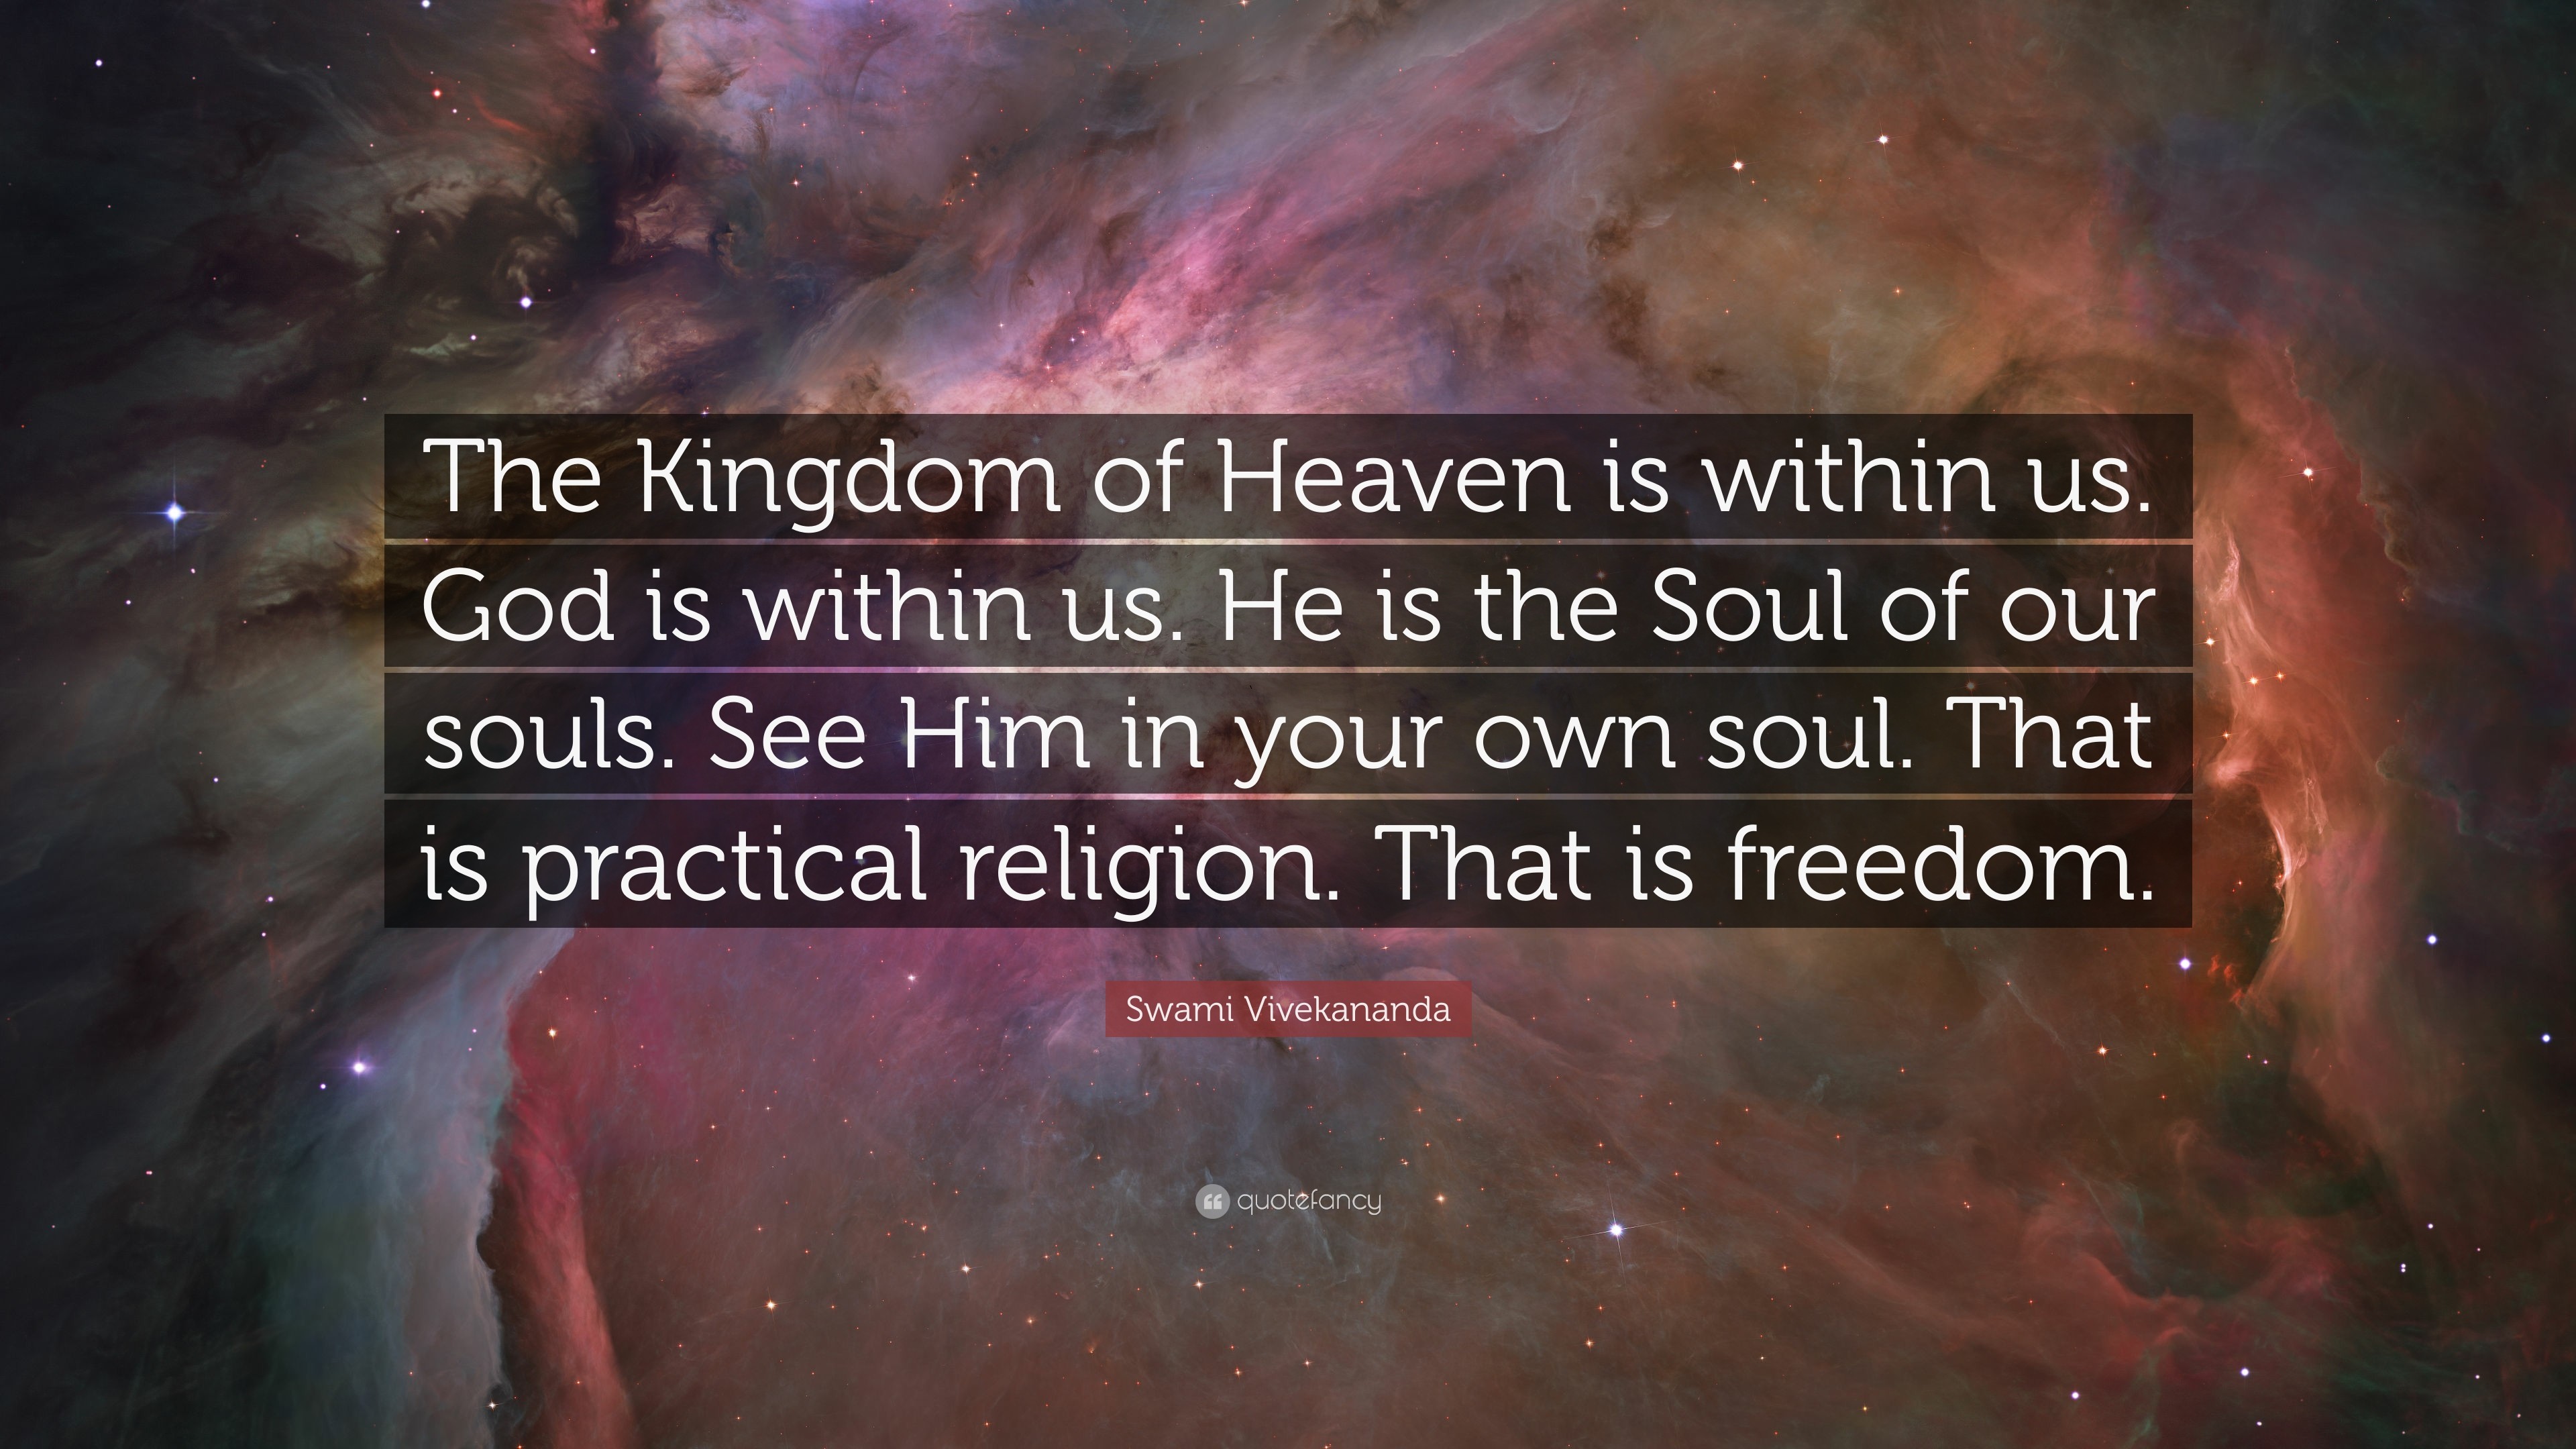 Swami Vivekananda Quote The Kingdom of Heaven is within us. God is within